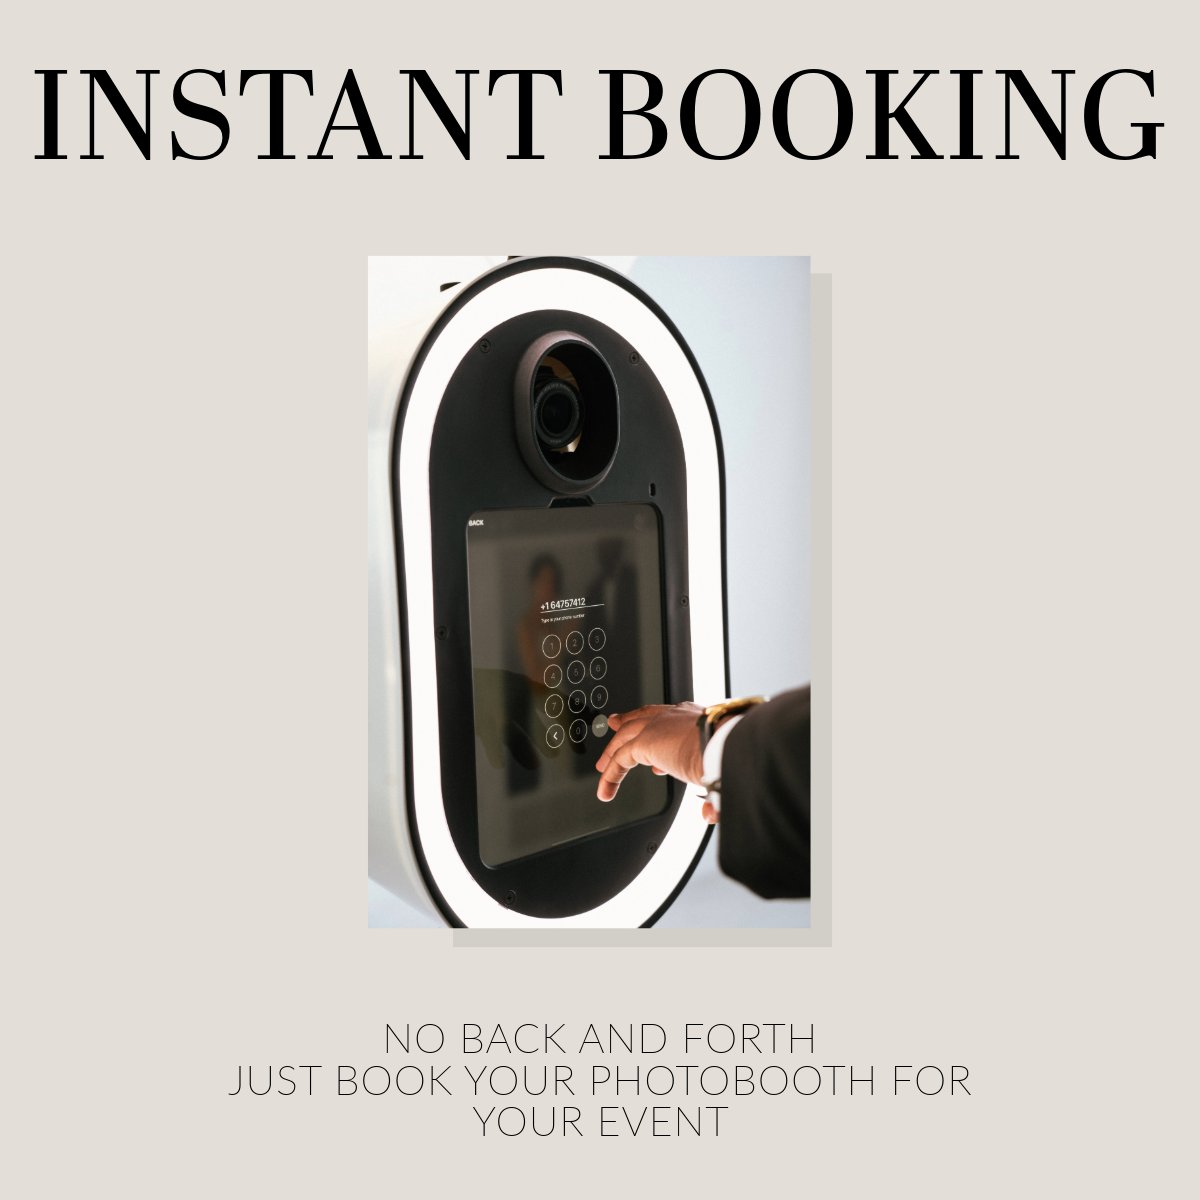 Streamline the process of booking your photobooth by eliminating the need for back-and-forth email communication. Take advantage of our inquiry-free photobooth booking process, available on our website! Website: dietzphotography.net/the-dietz-phot…